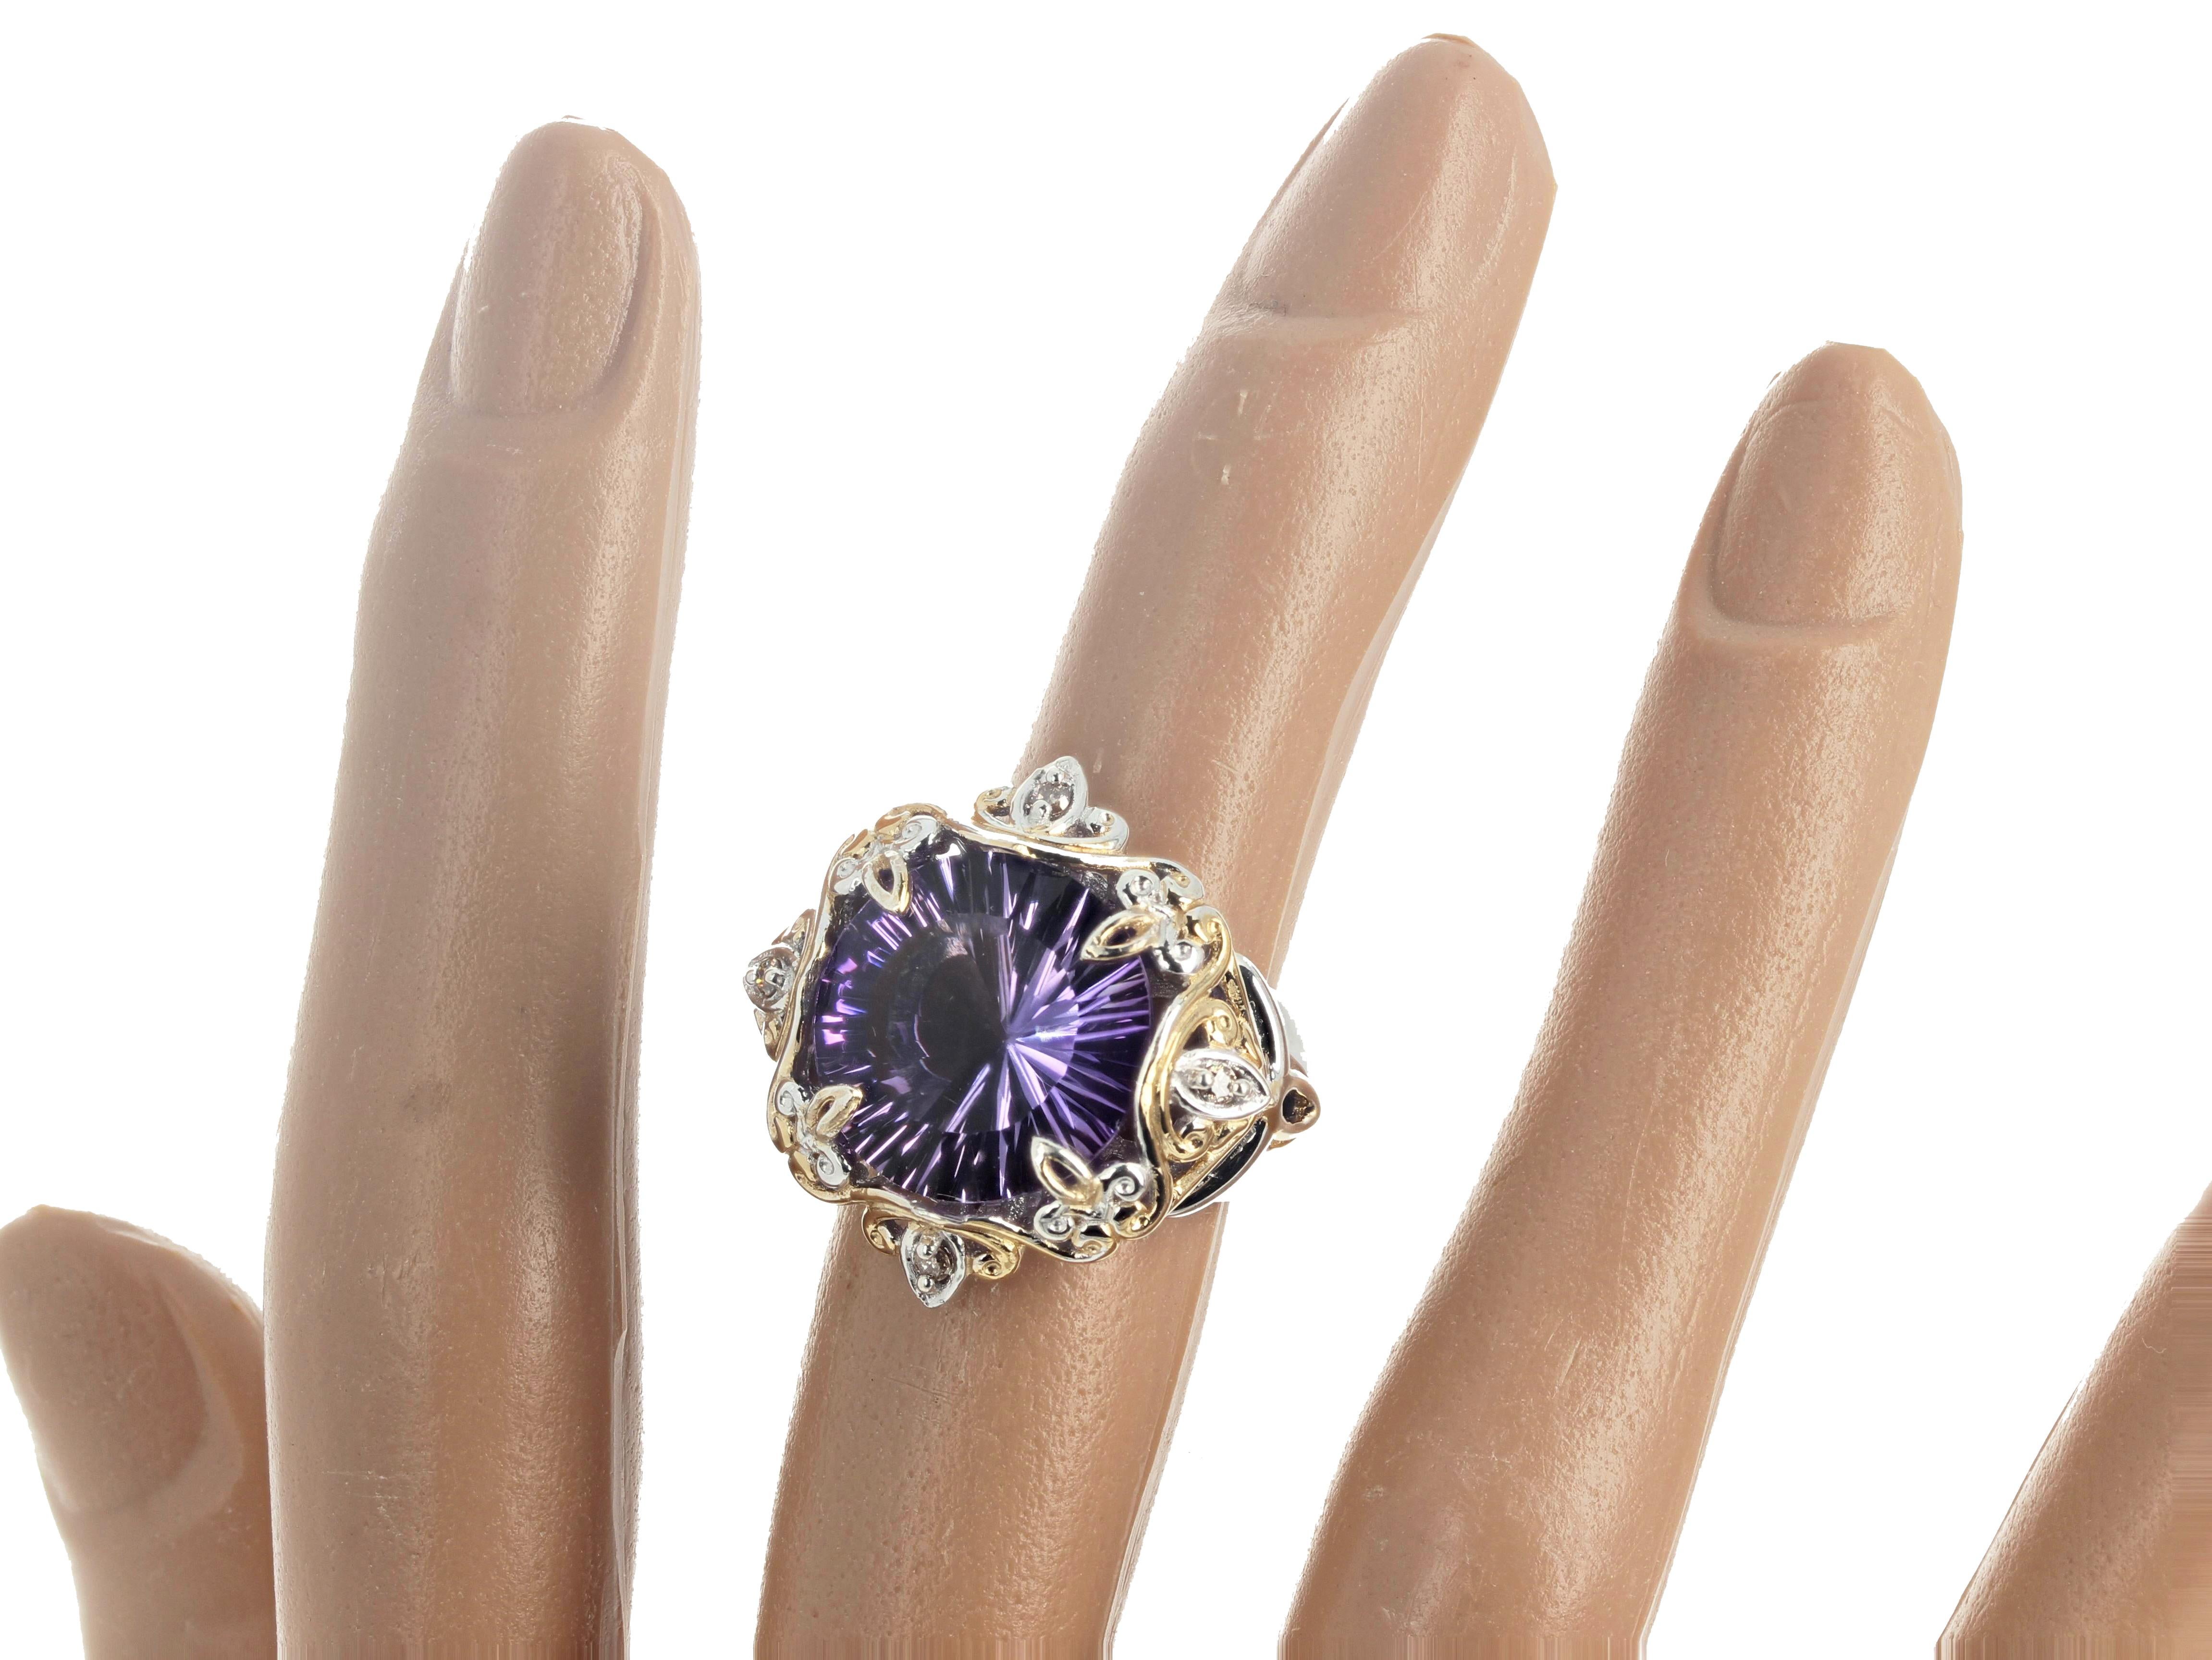 AJD Famous Fantasy Cut 8.9Ct. Natural Amethyst Sterling Silver & Goldy Ring For Sale 3